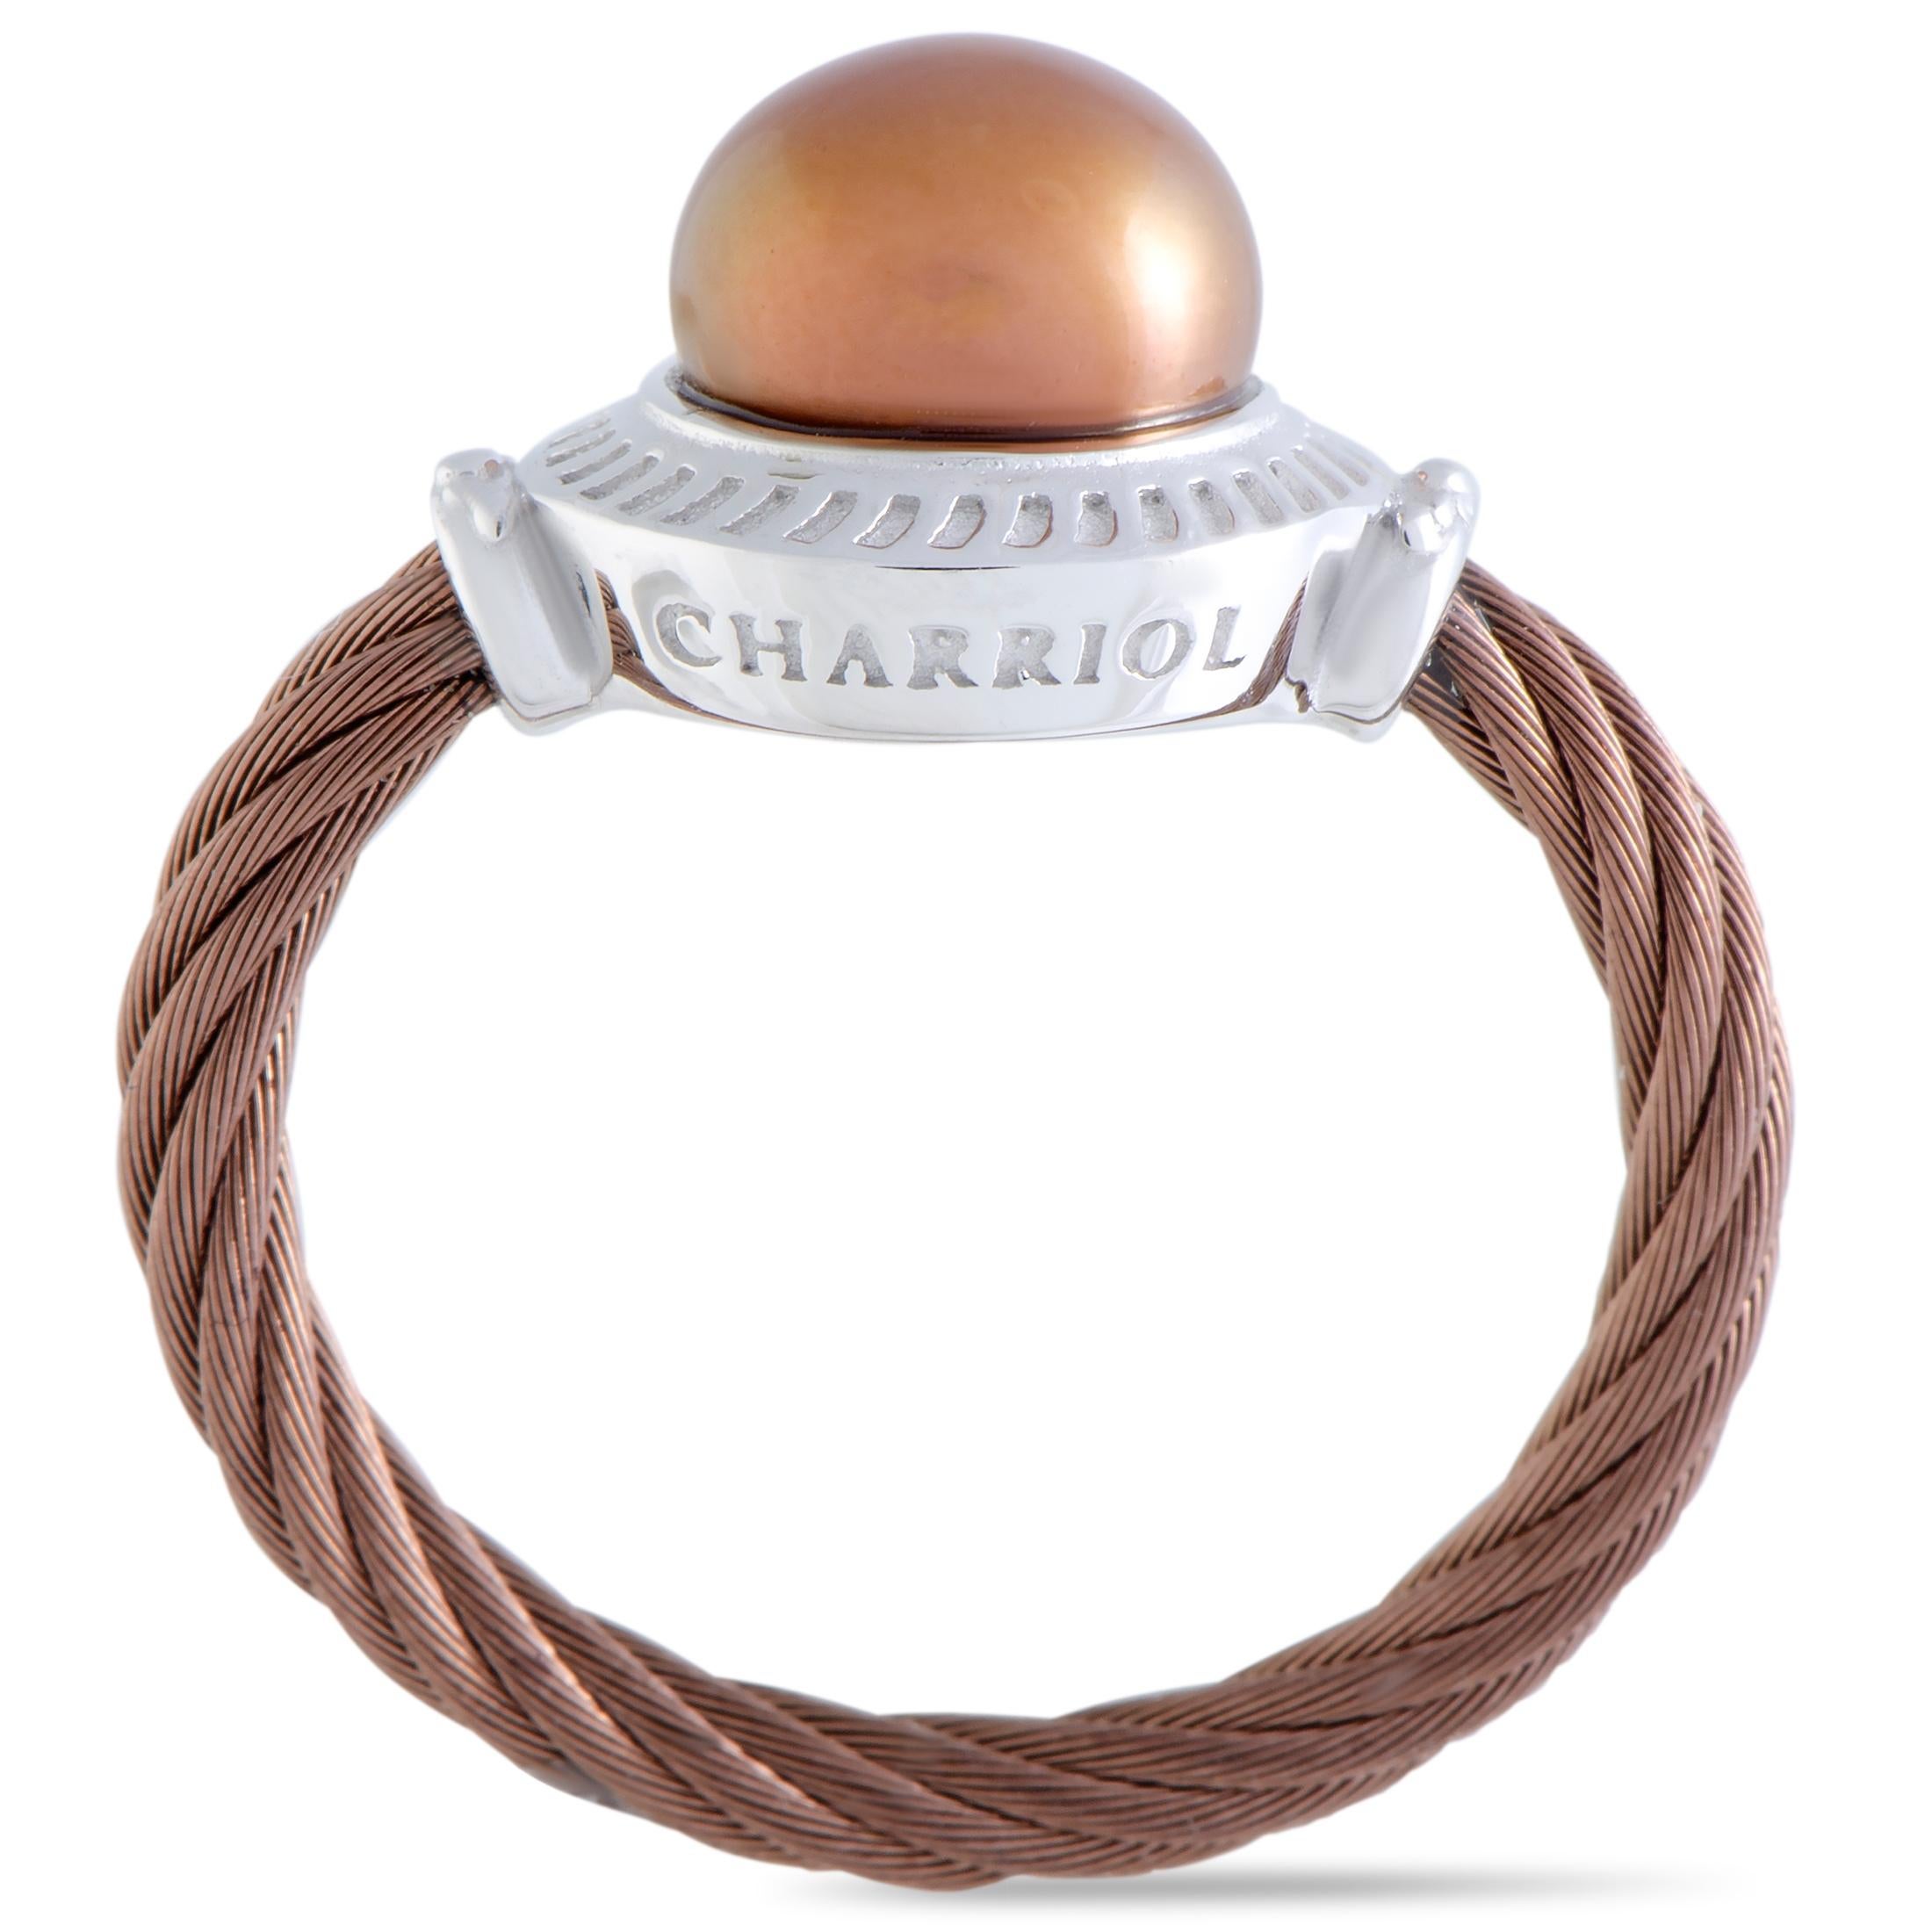 This charming “Pearl” ring presented by Charriol is a vision of sophisticated refinement with its sublime understated design and tasteful décor. The ring is made of partially bronze PVD-coated stainless steel and it is expertly set with a gorgeous